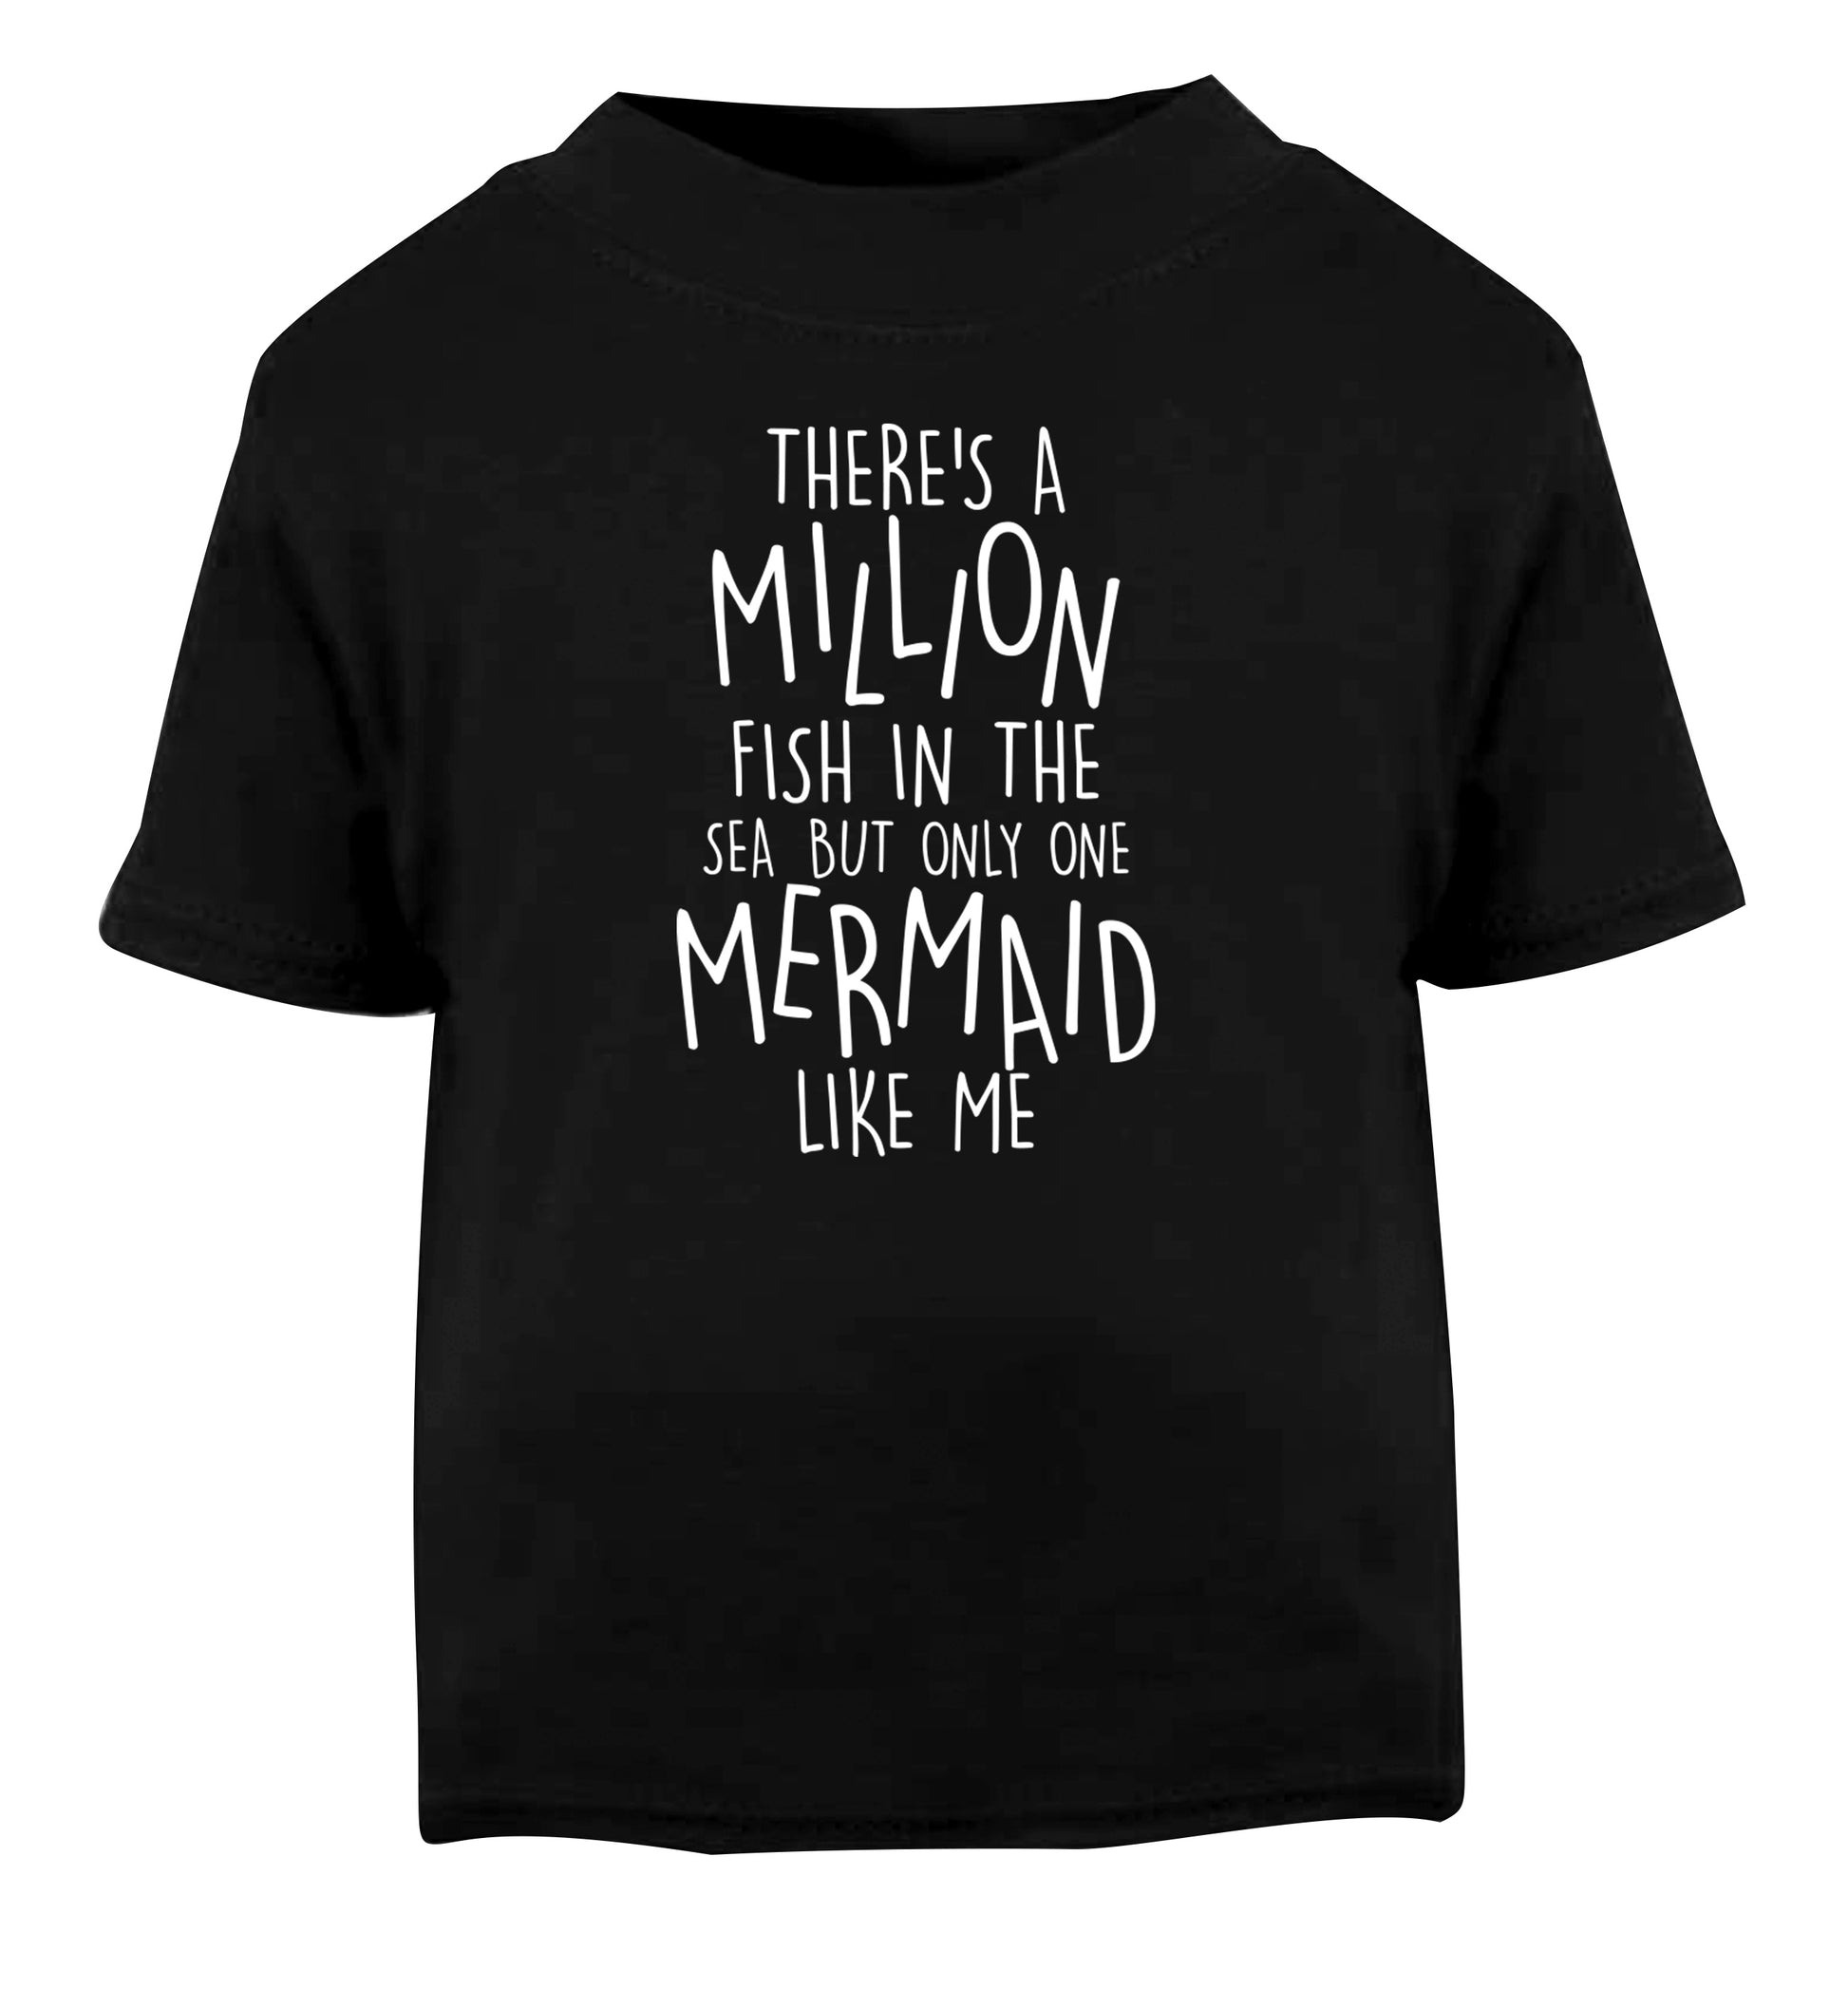 There's a million fish in the sea but only one mermaid like me Black Baby Toddler Tshirt 2 years